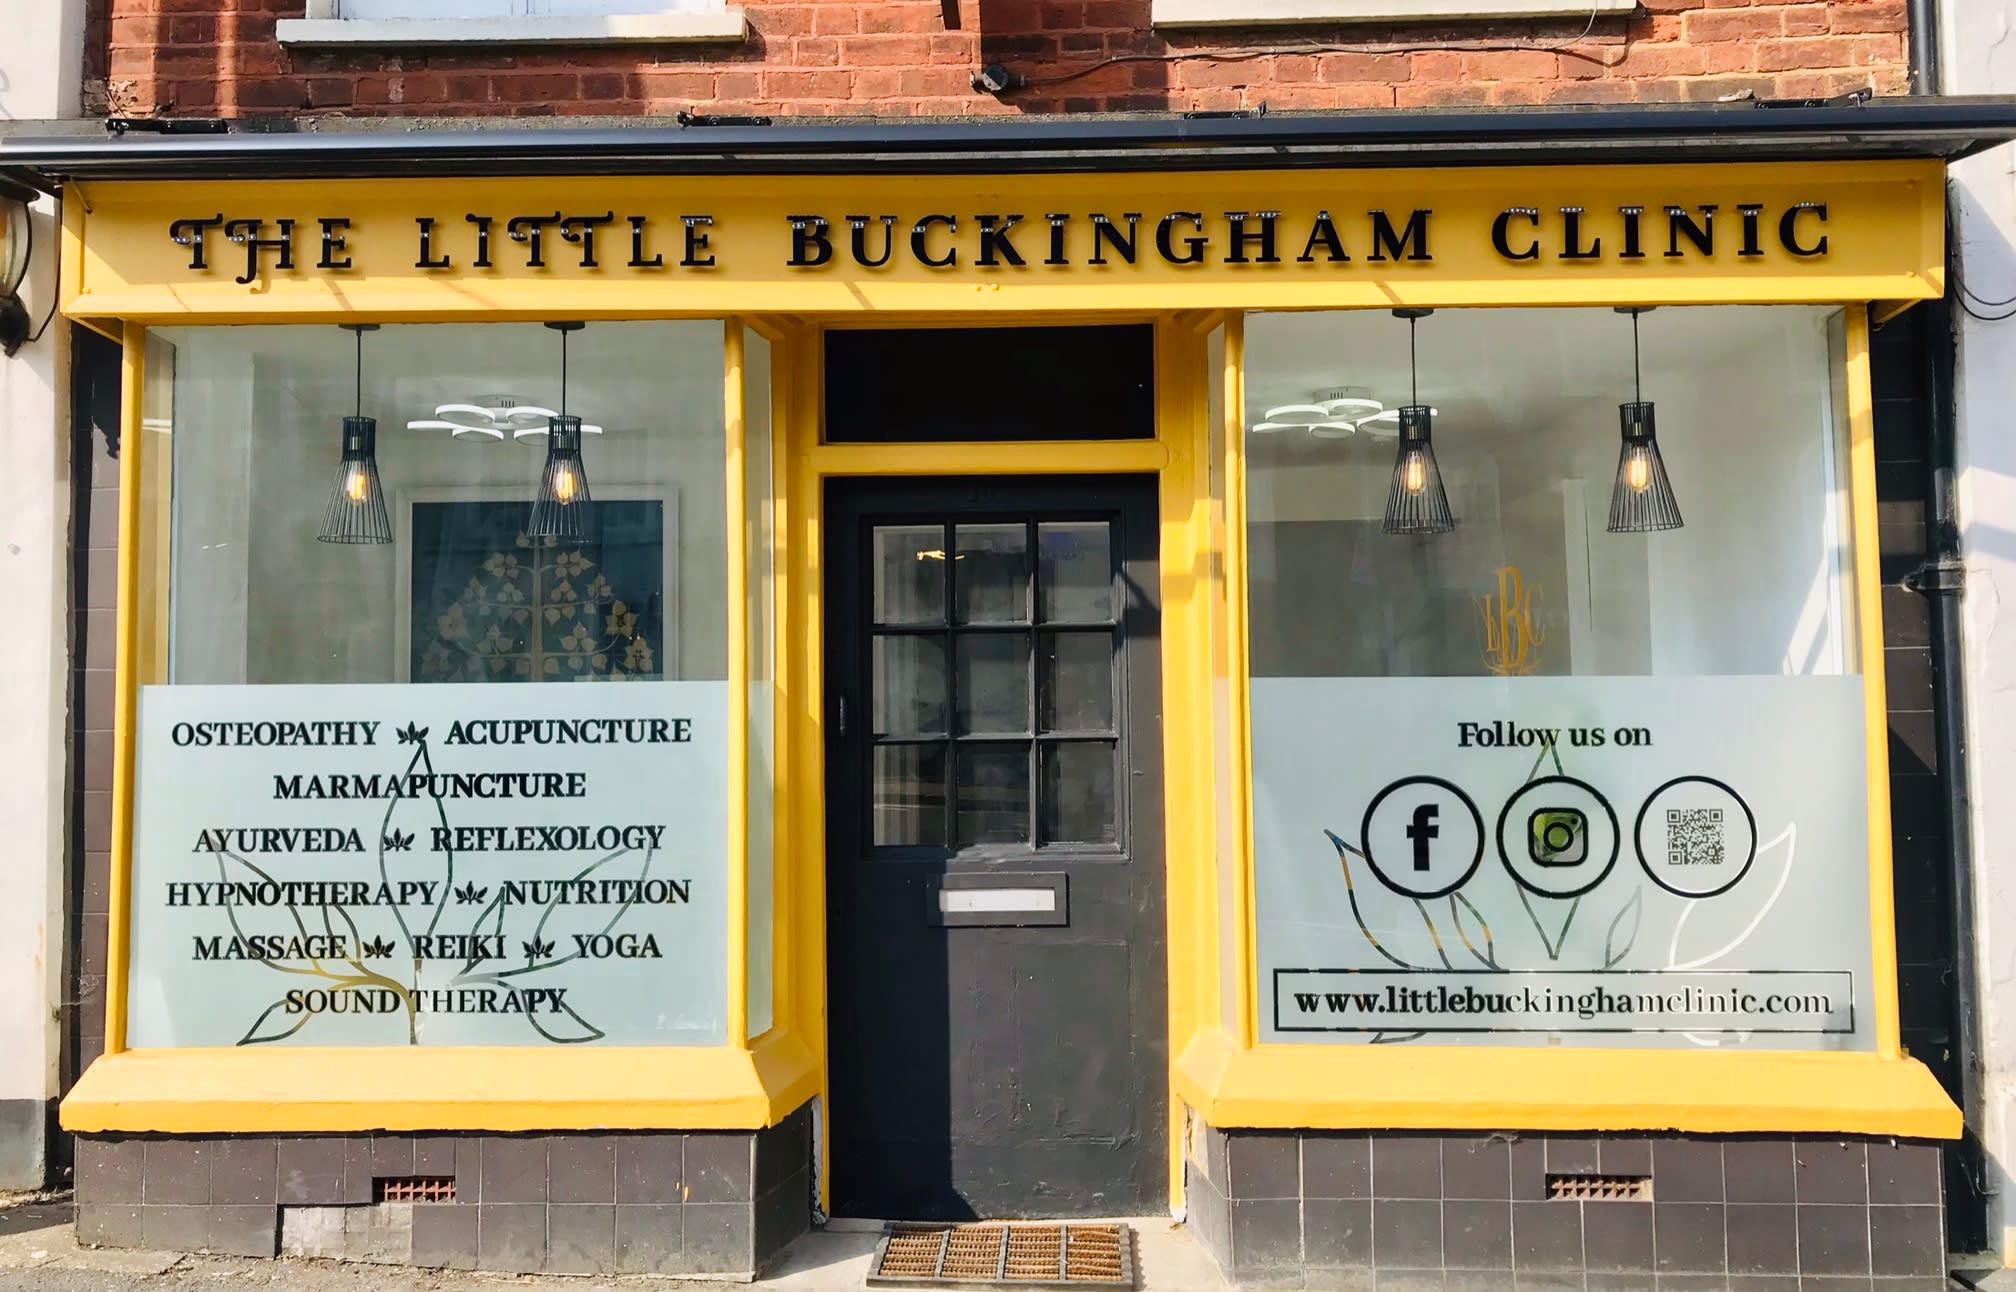 Images The Little Buckingham Clinic